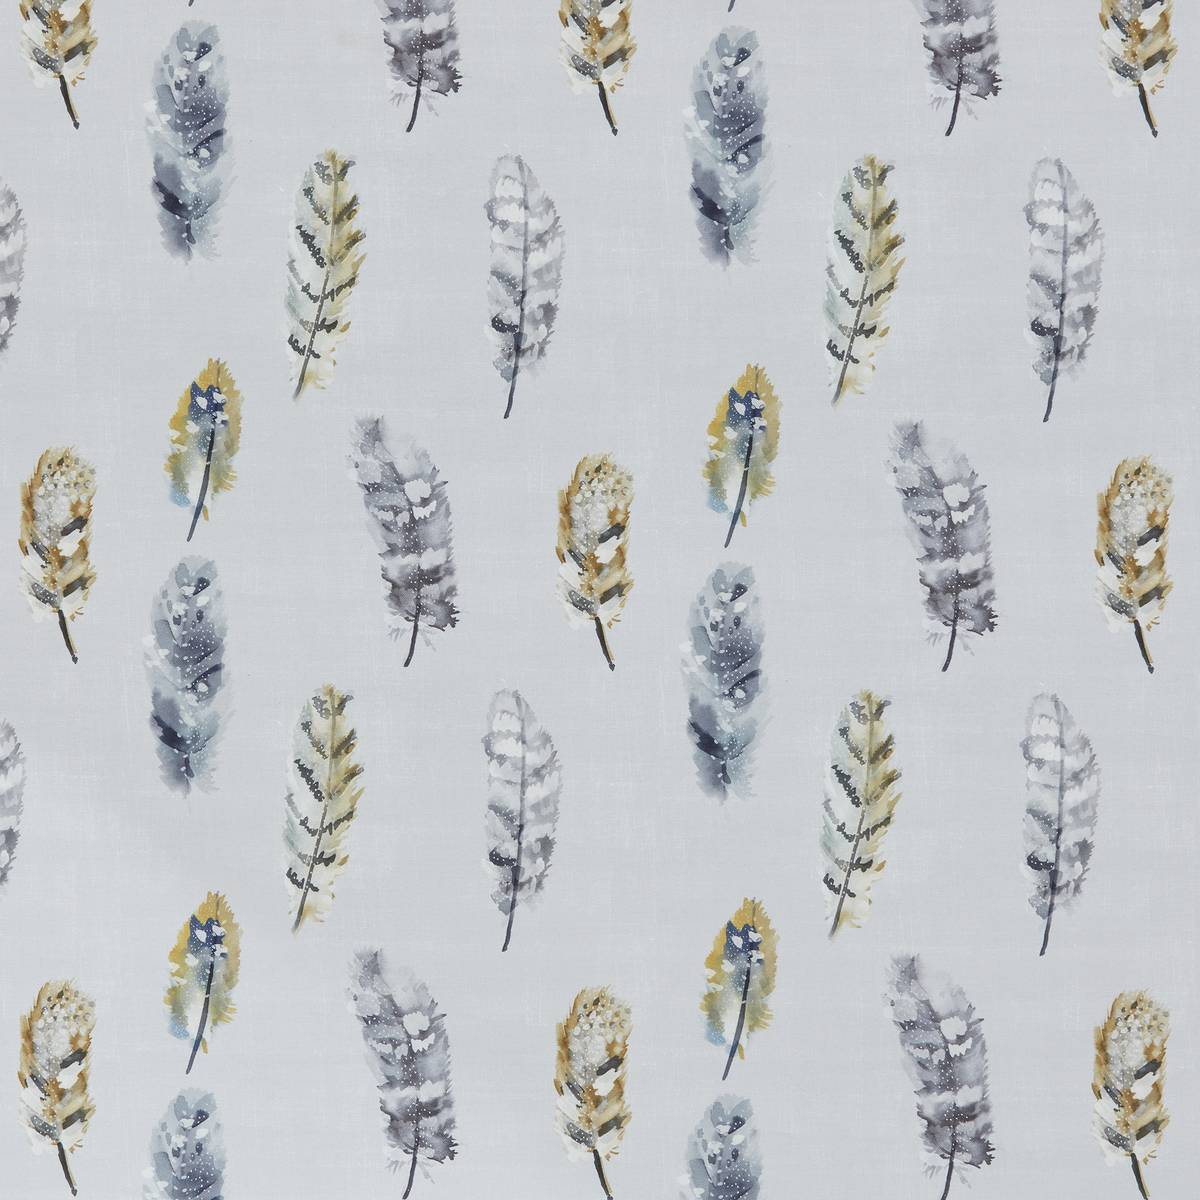 Chalfont Stone Fabric by Ashley Wilde